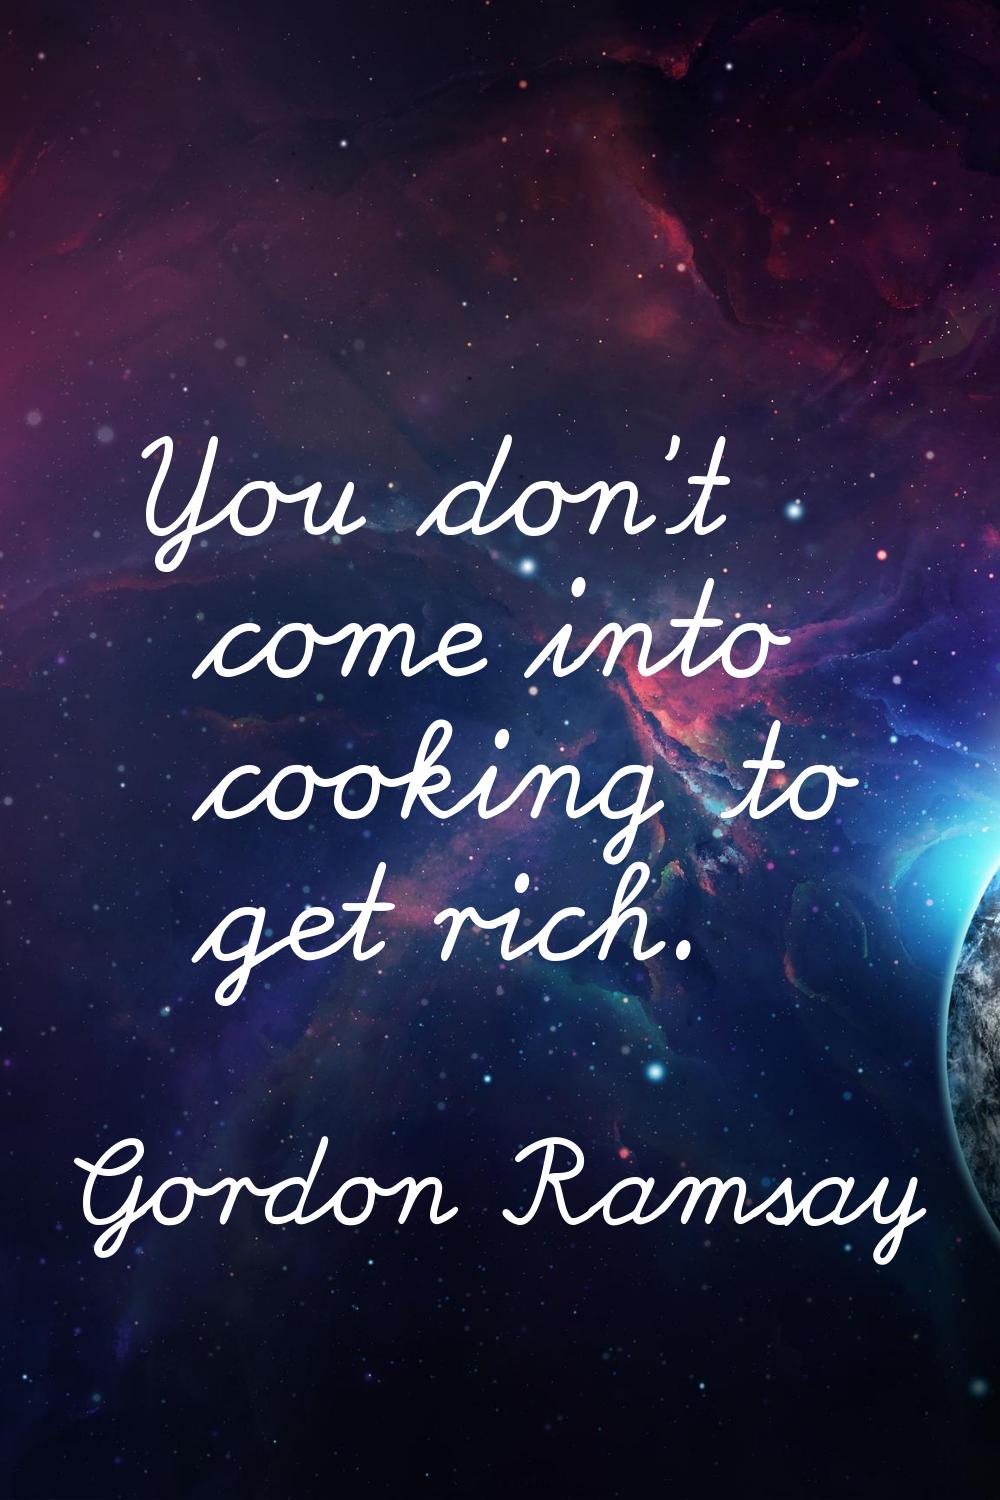 You don't come into cooking to get rich.